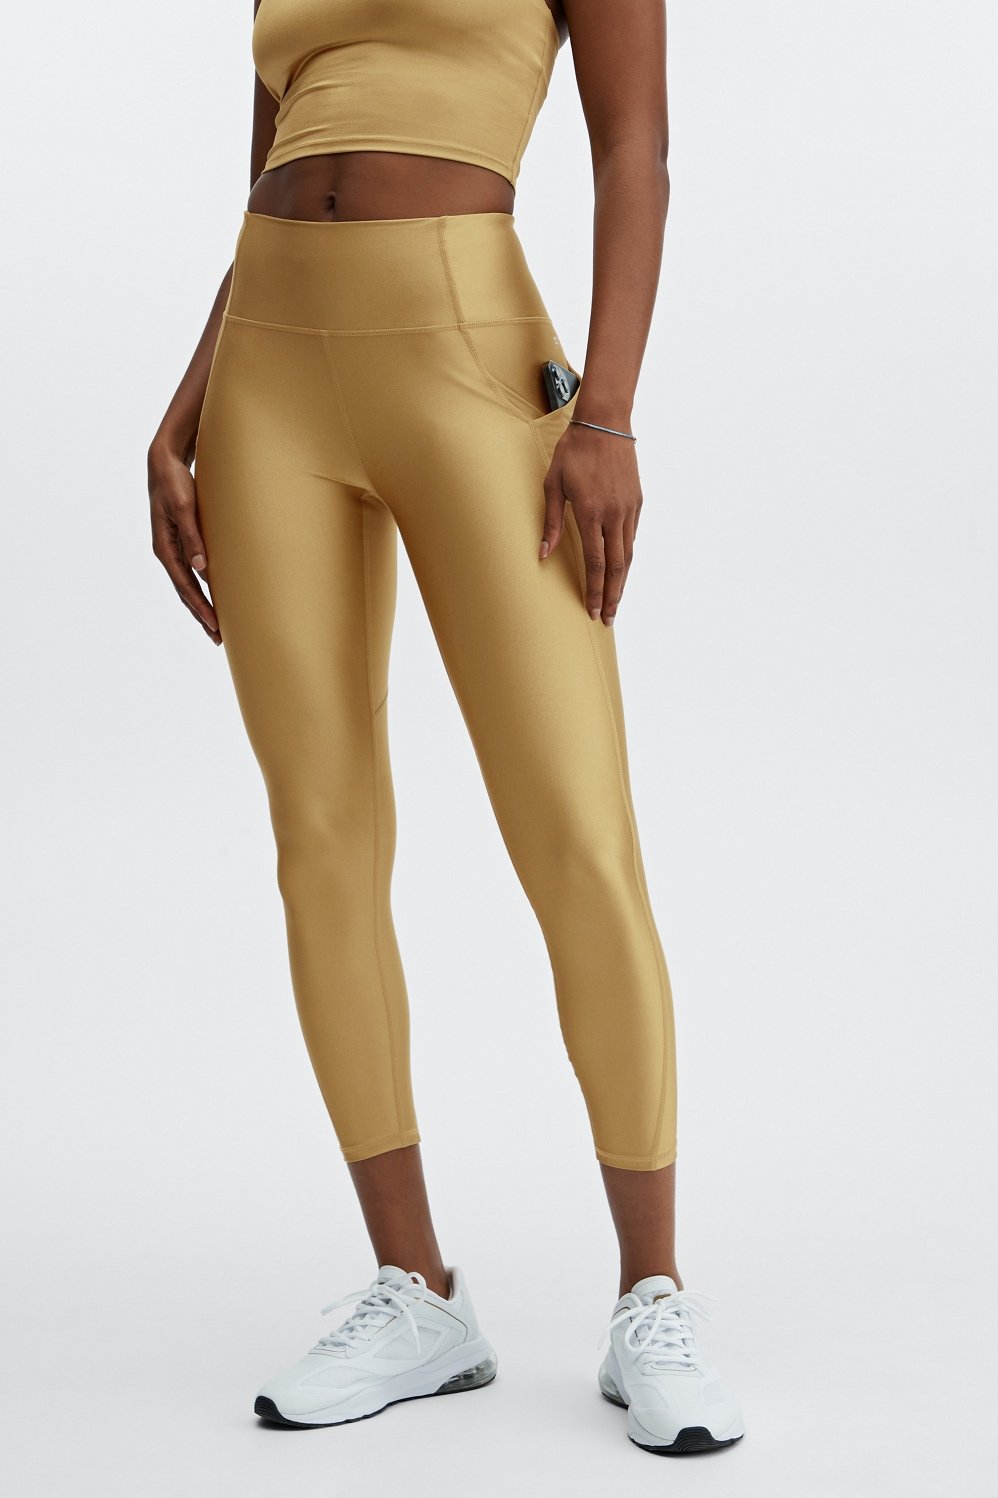 Fabletics Oasis Pureluxe High-Waisted Legging Pink - $35 (39% Off